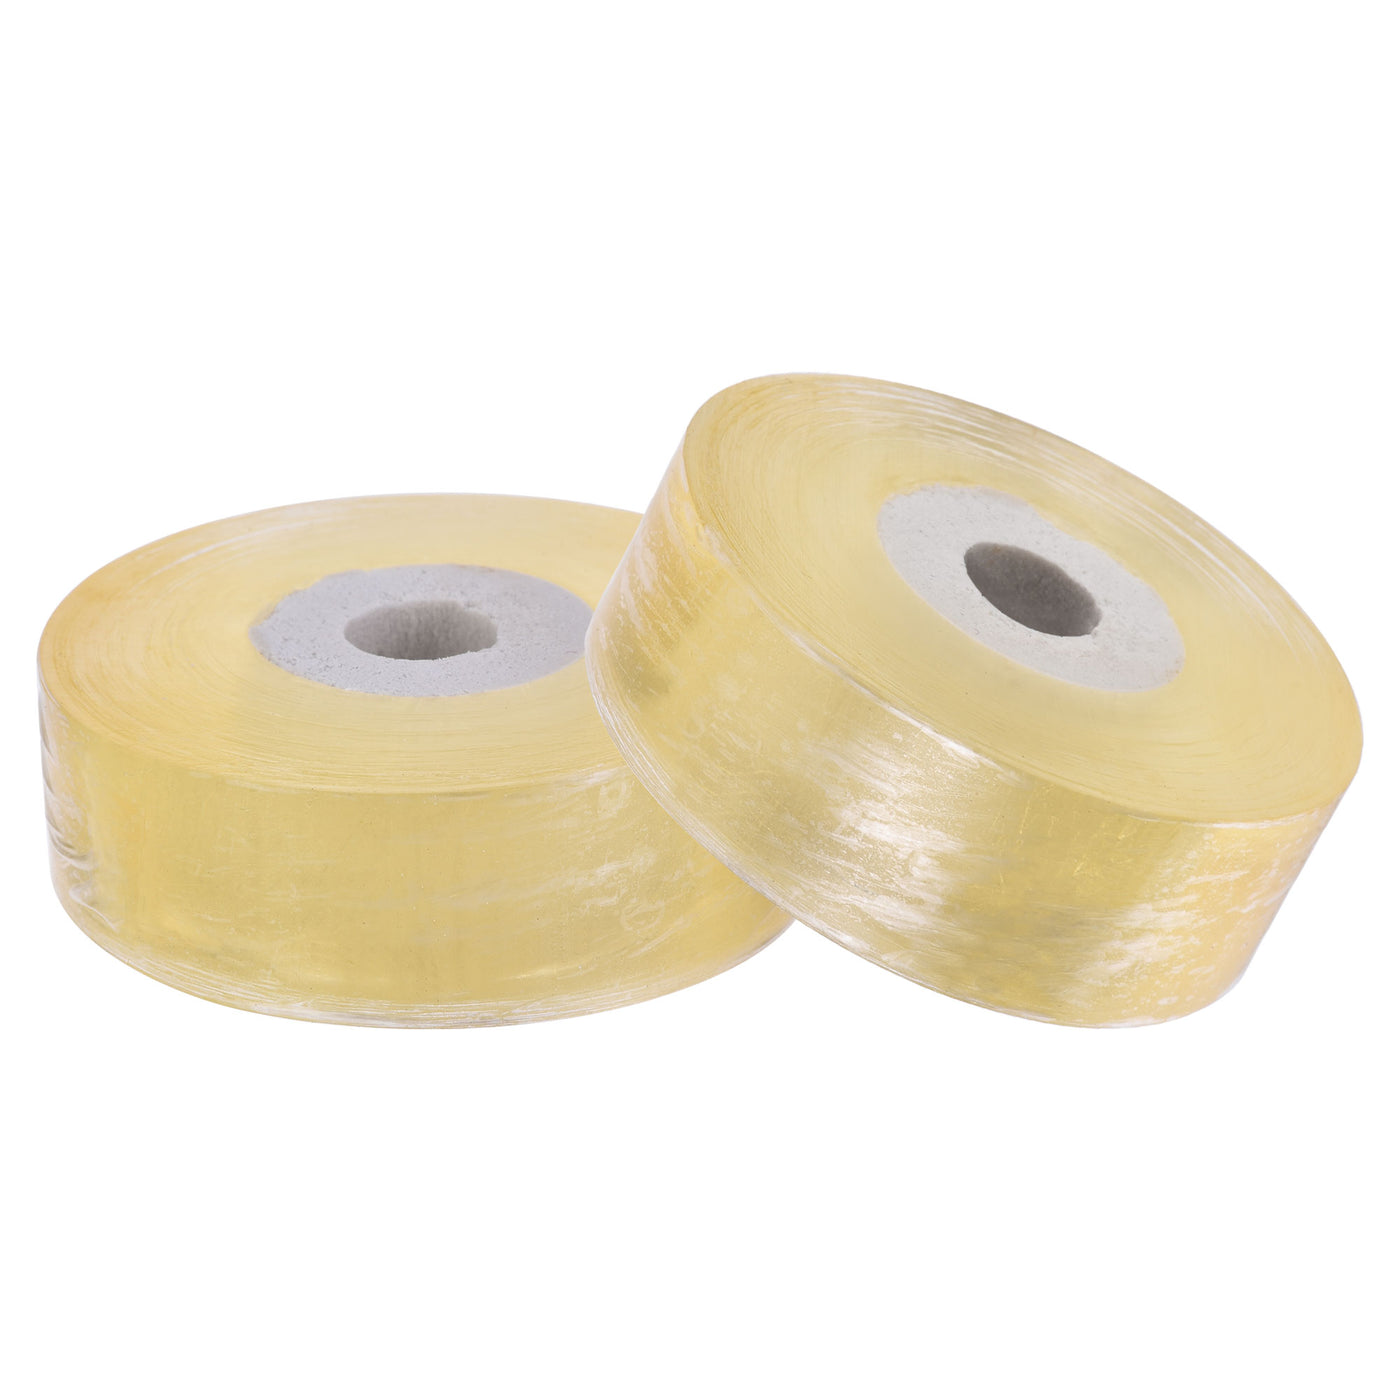 Uxcell Uxcell Grafting Tape PE Self-Adhesive 20mm x100m for Garden Trees Yellow 2 Pcs